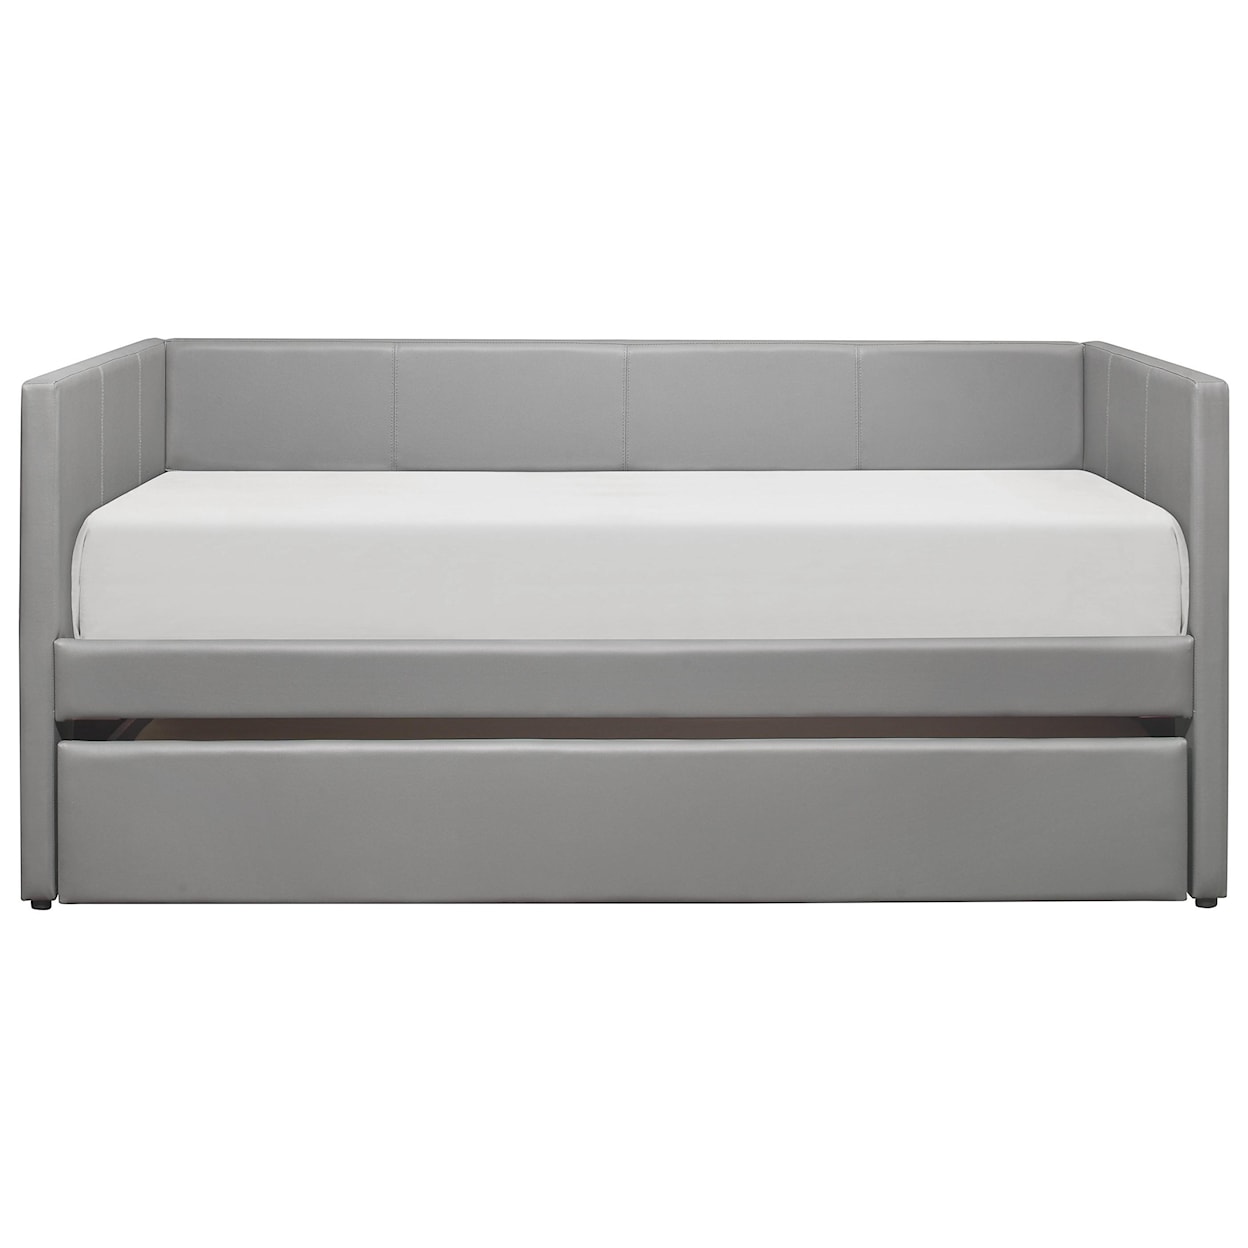 Homelegance Furniture Adra Daybed With Trundle